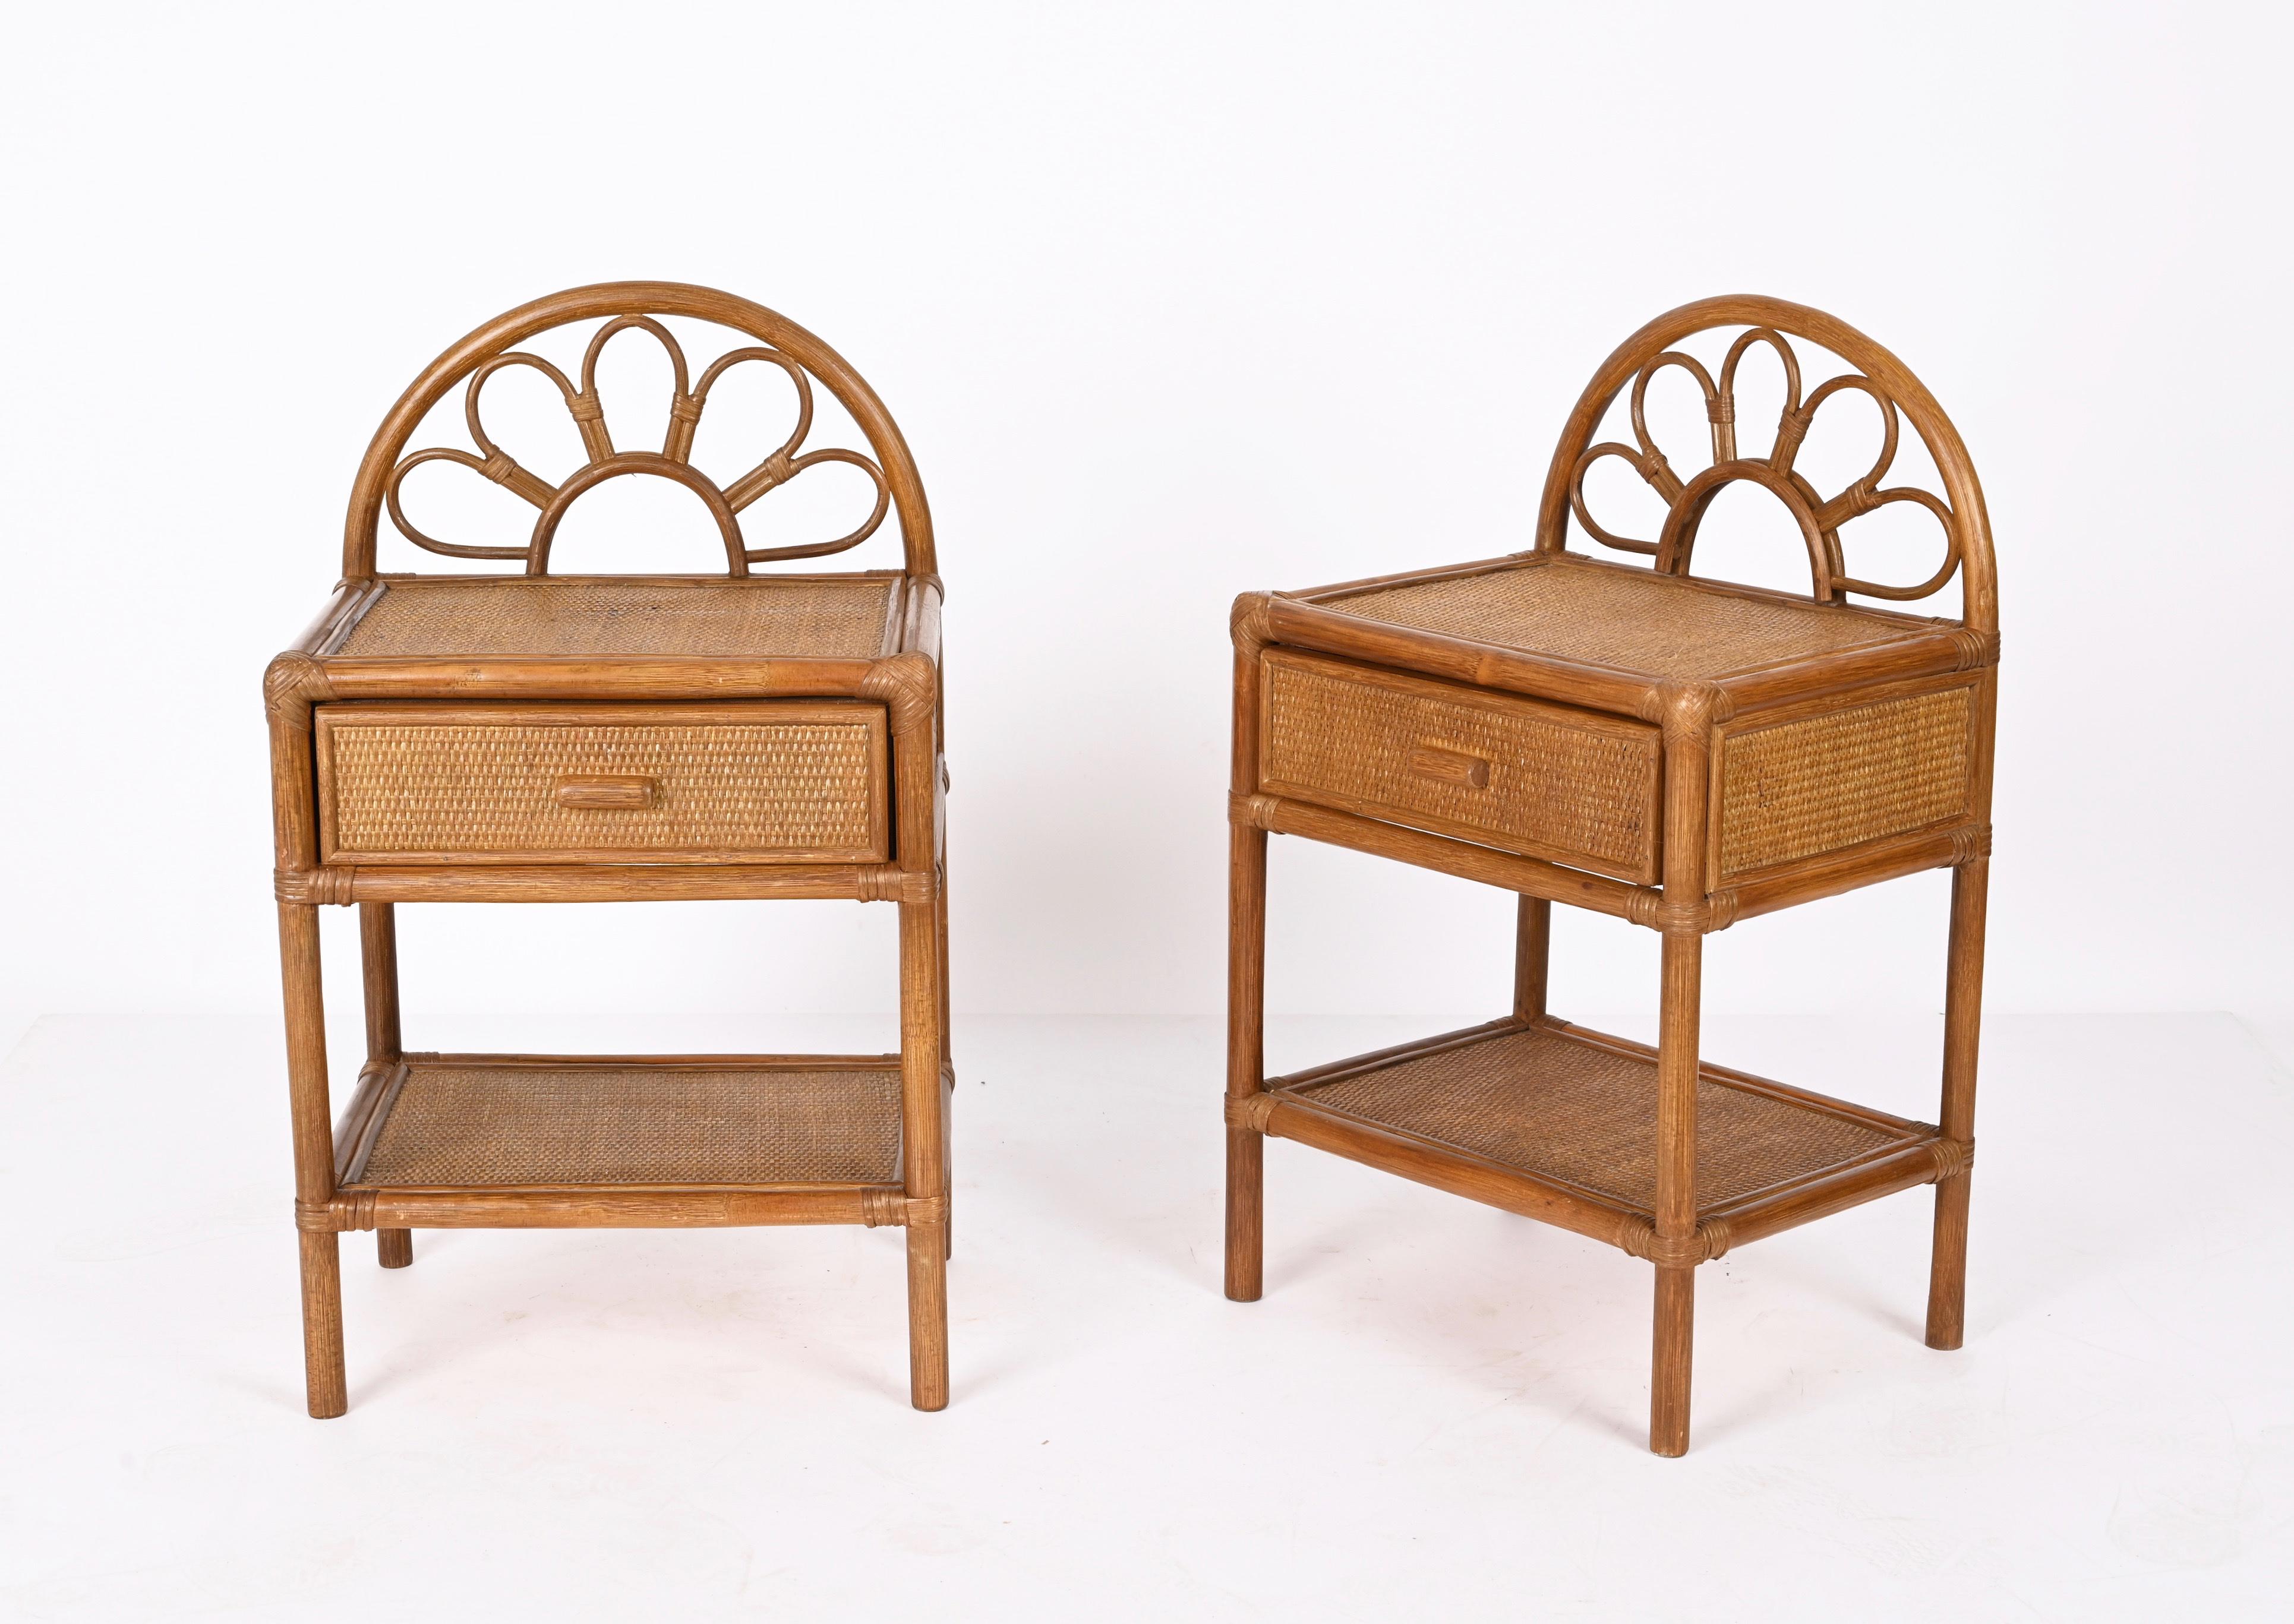 European Pair of Mid-Century Modern Bamboo Cane and Rattan Italian Bedside Tables, 1970s